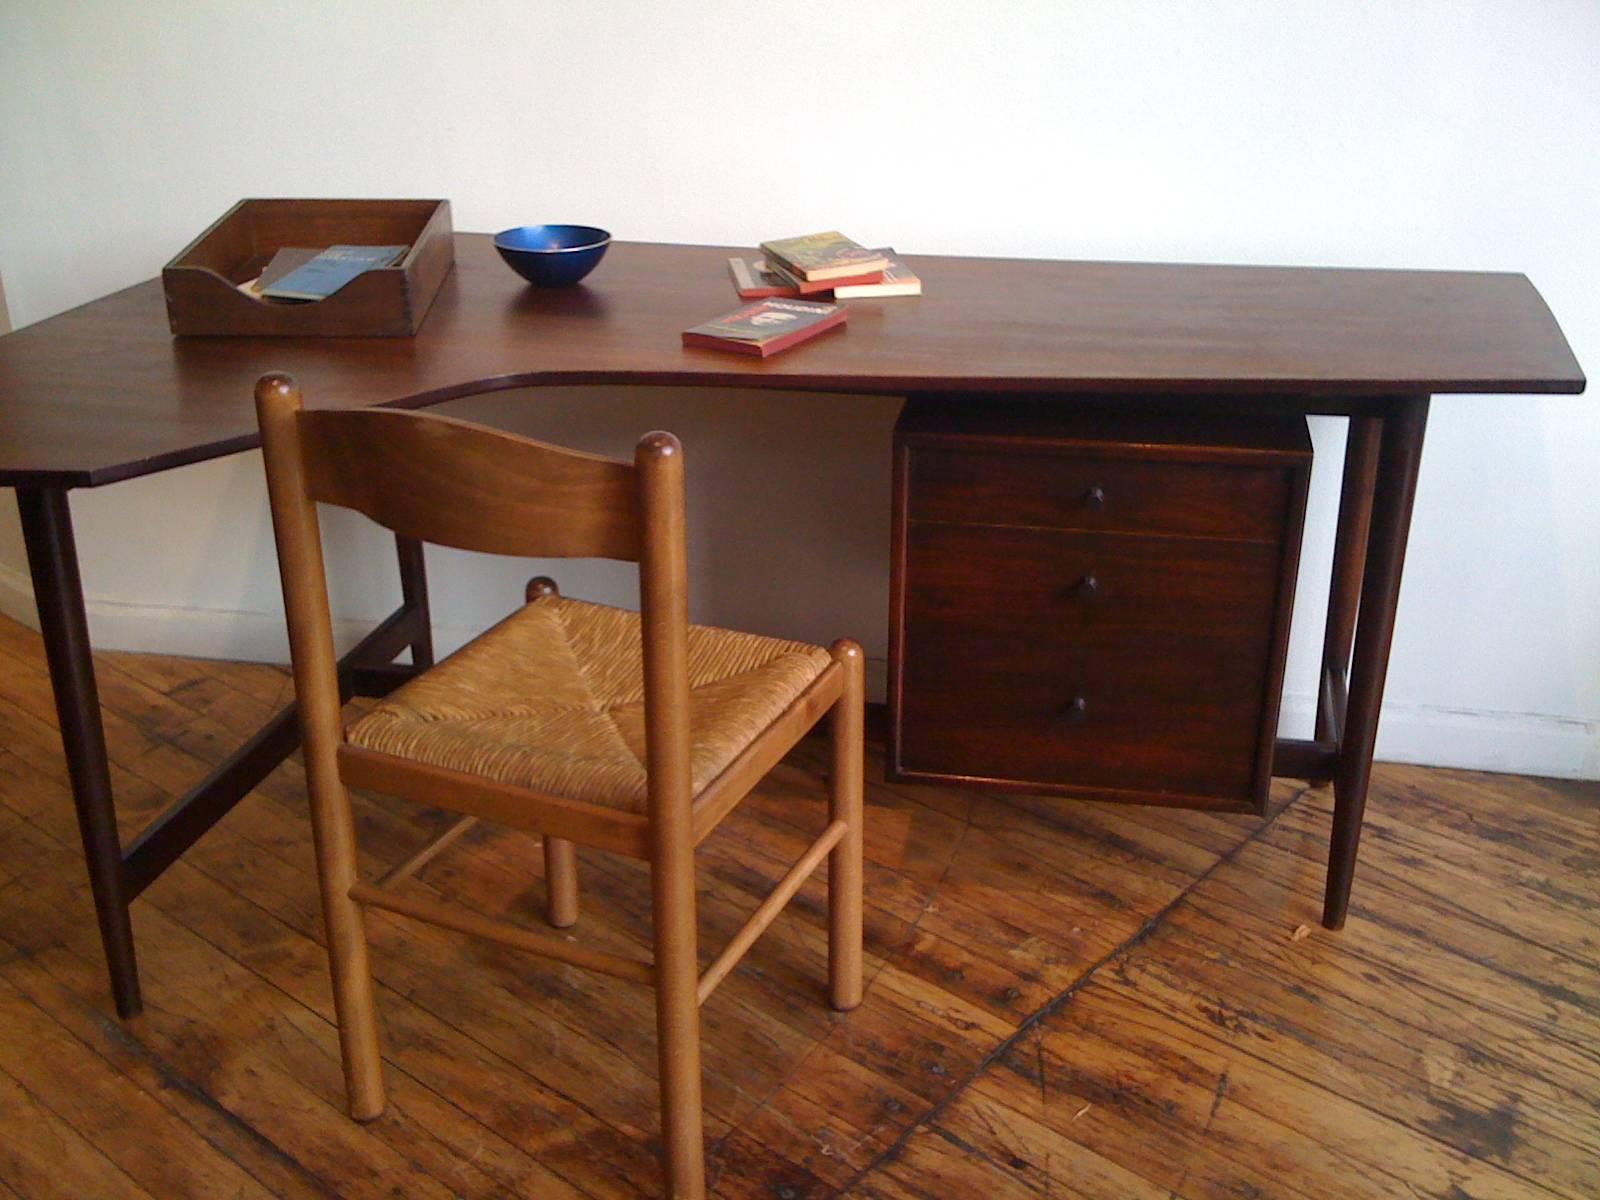 Richard Artschwager studio walnut desk. From 1950s. In good vintage condition with normal wear commensurate with age.